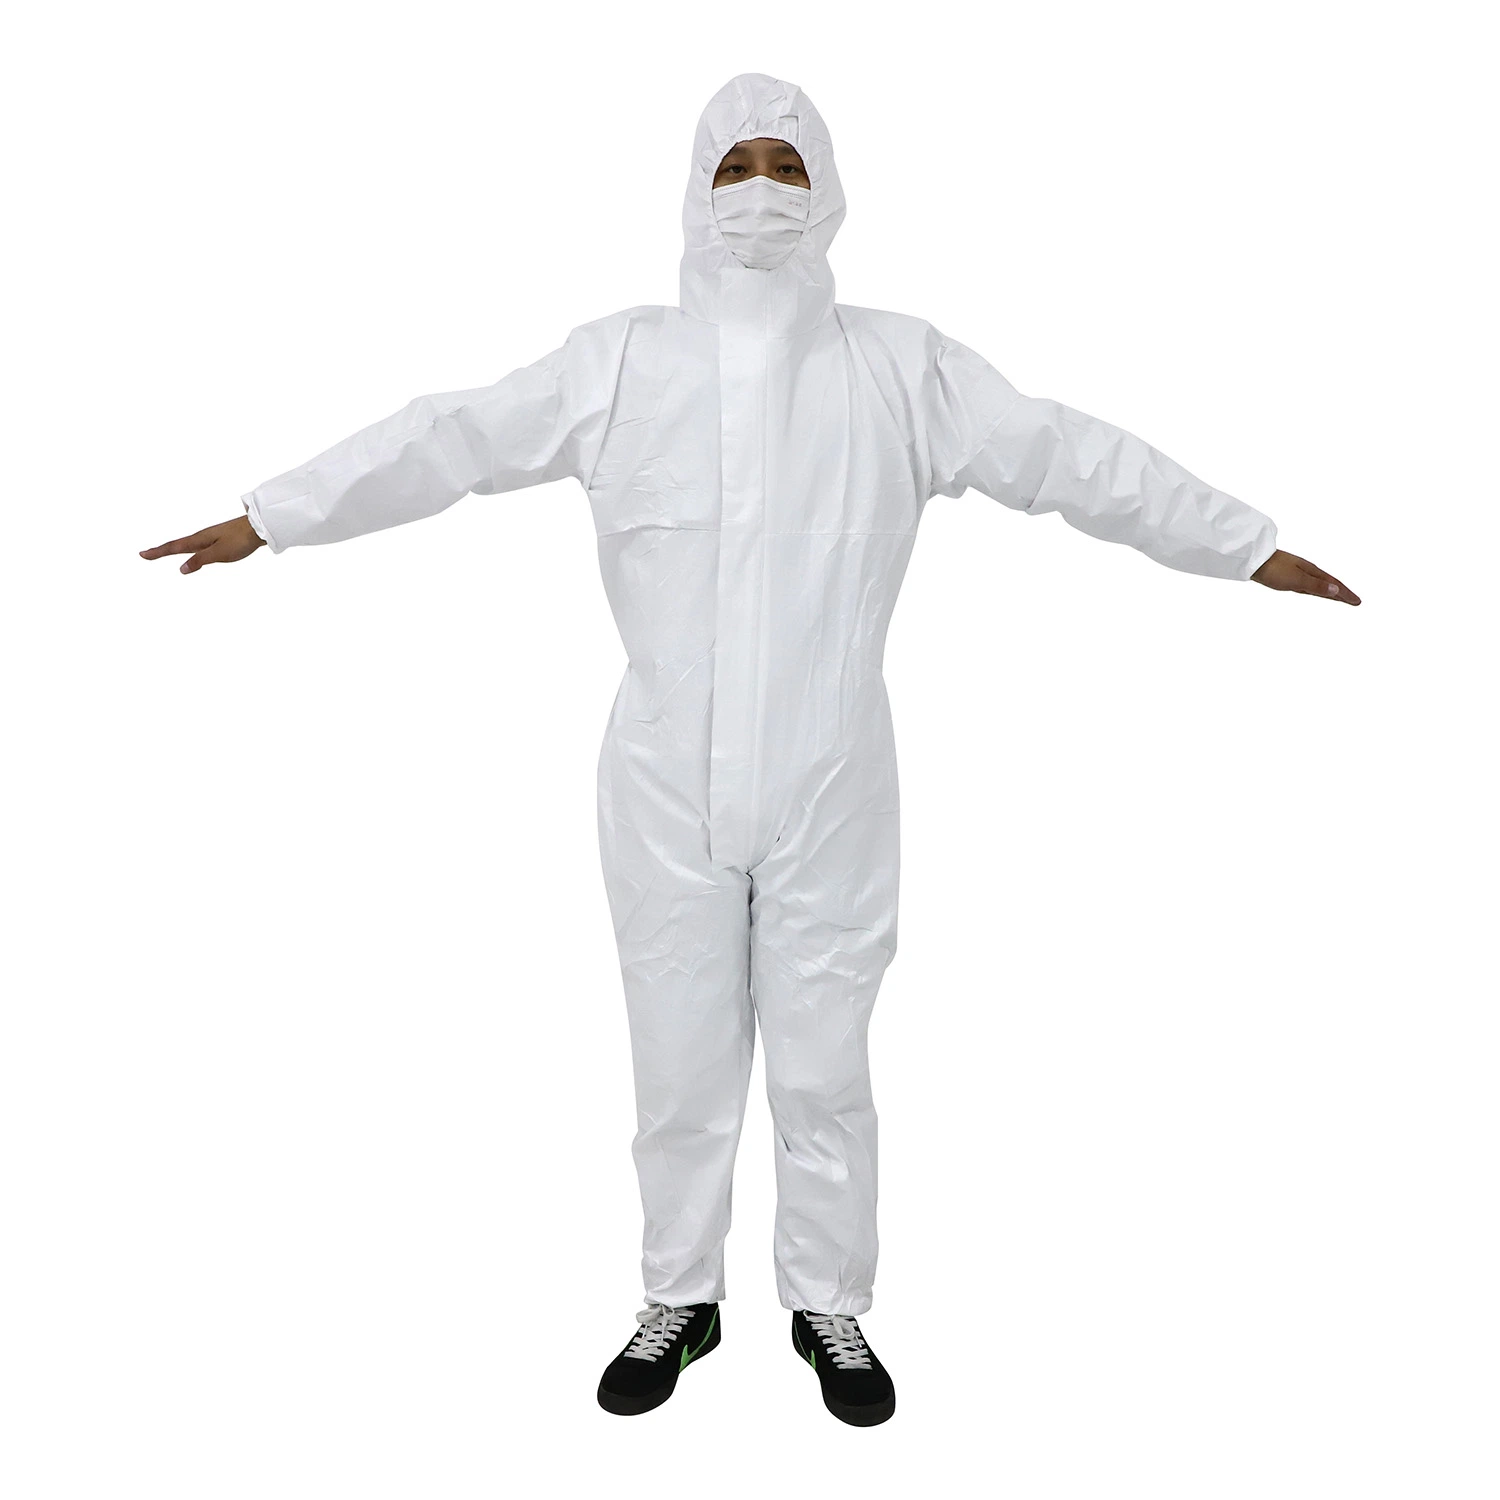 High Quality Non-Sterile Personal Protective CE Certified Safety Clothing